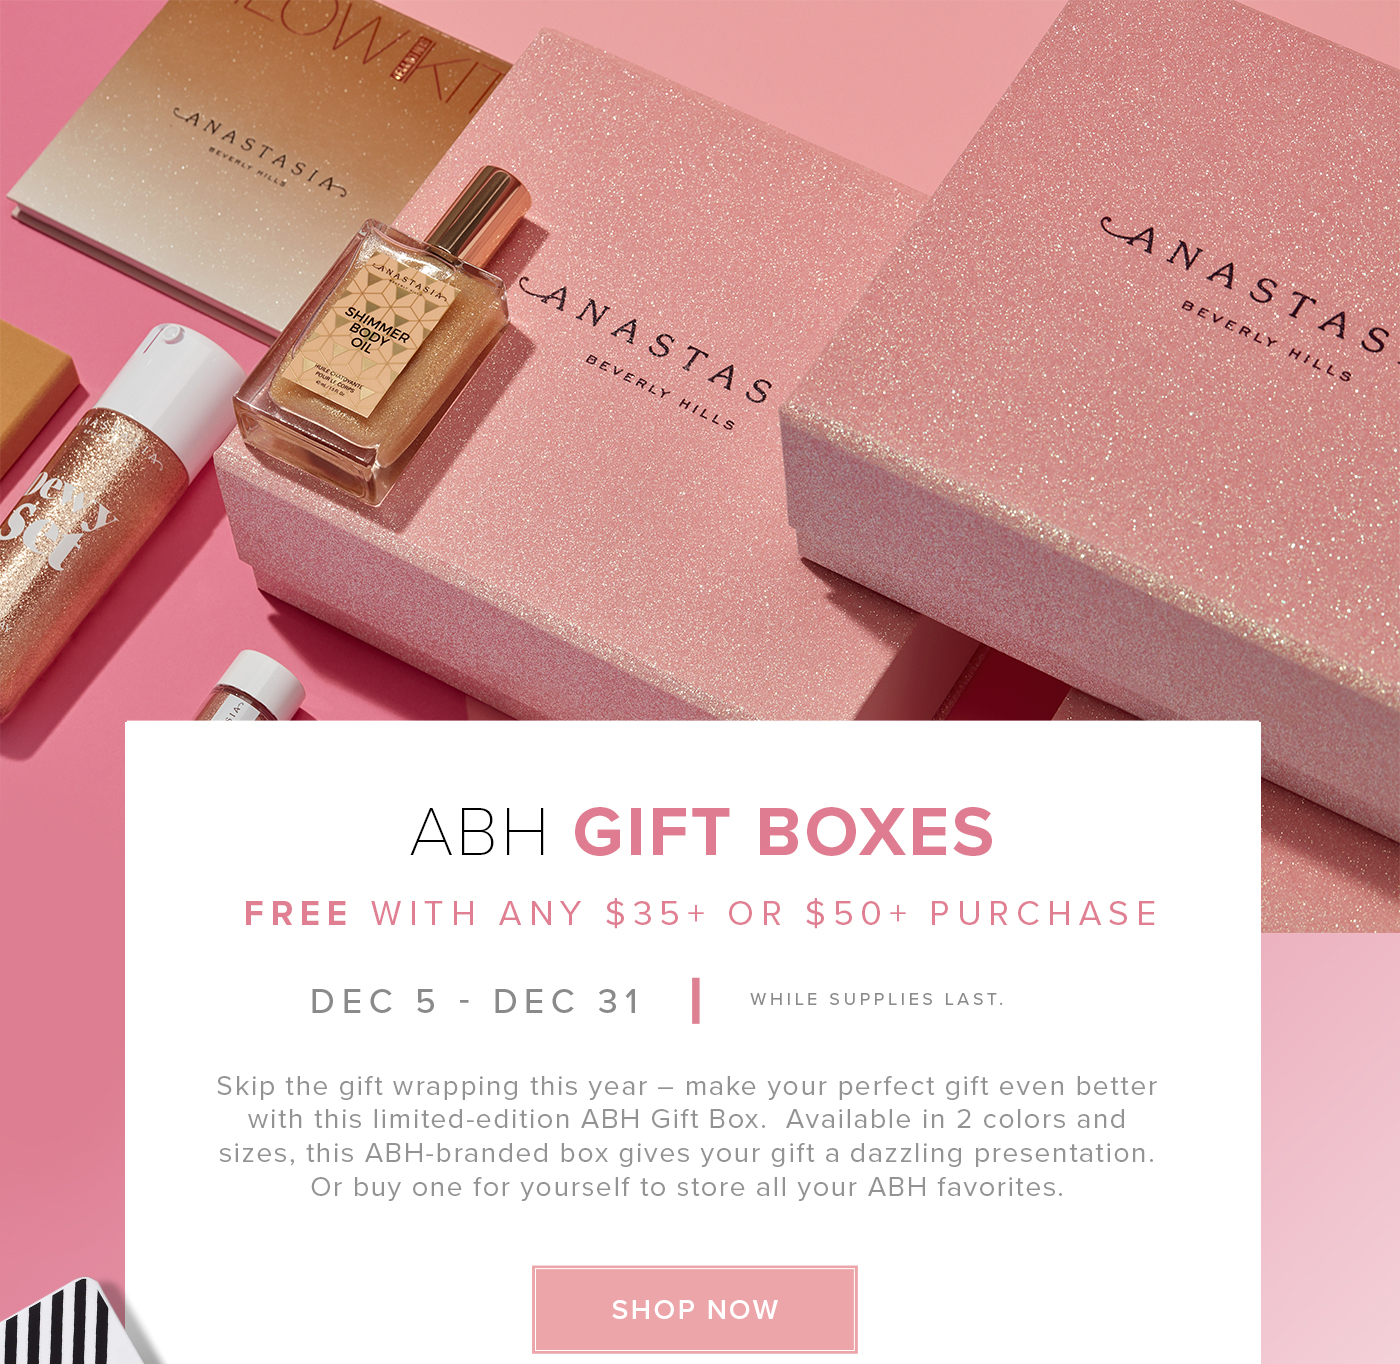 ABH GIFT BOXES FREE WITH ANY $35+ OR $50+ PURCHASE